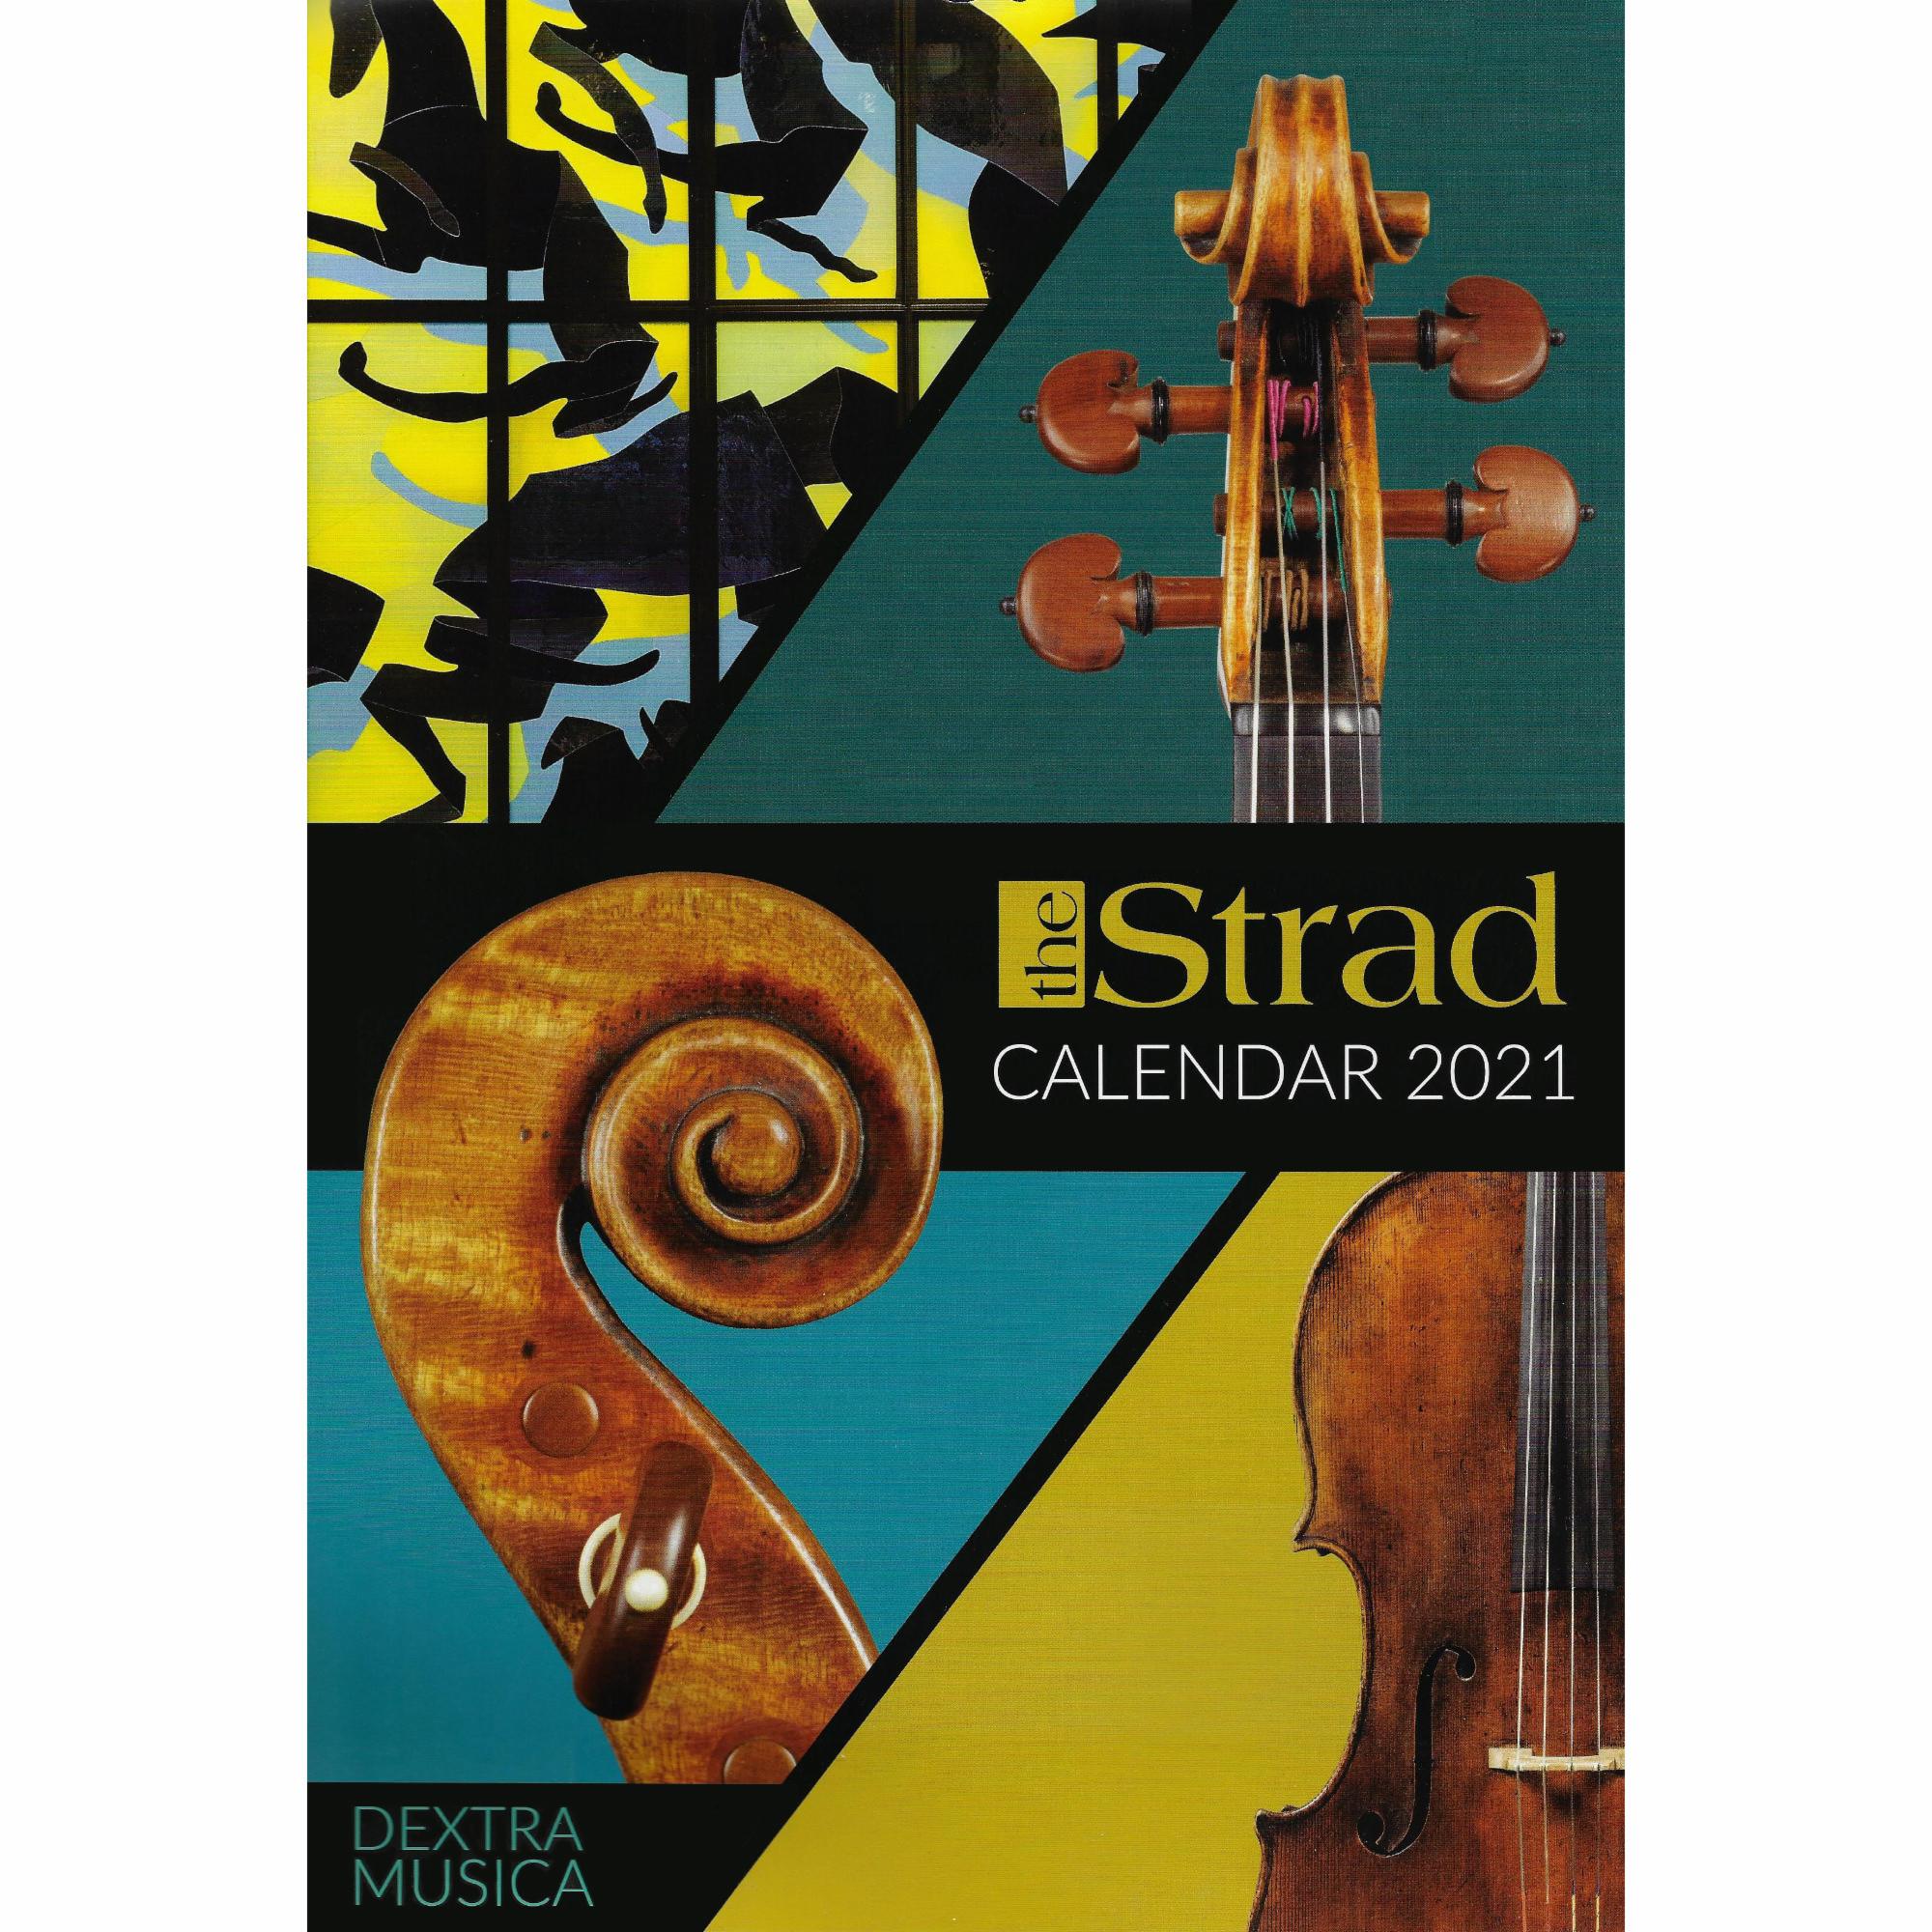 The Strad Calender 2021